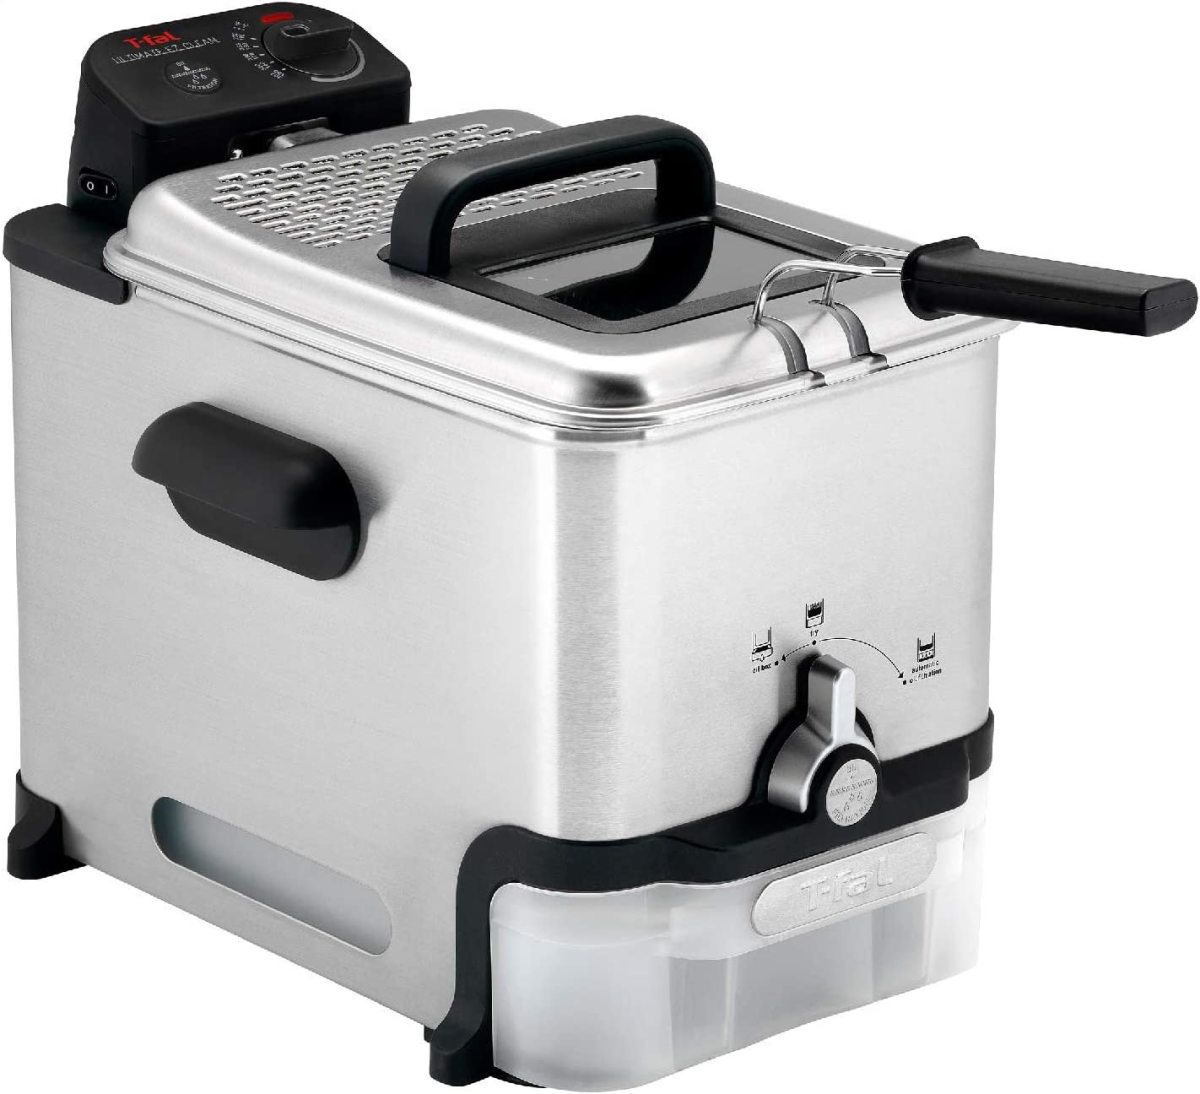 The T-fal deep fryer with basket.